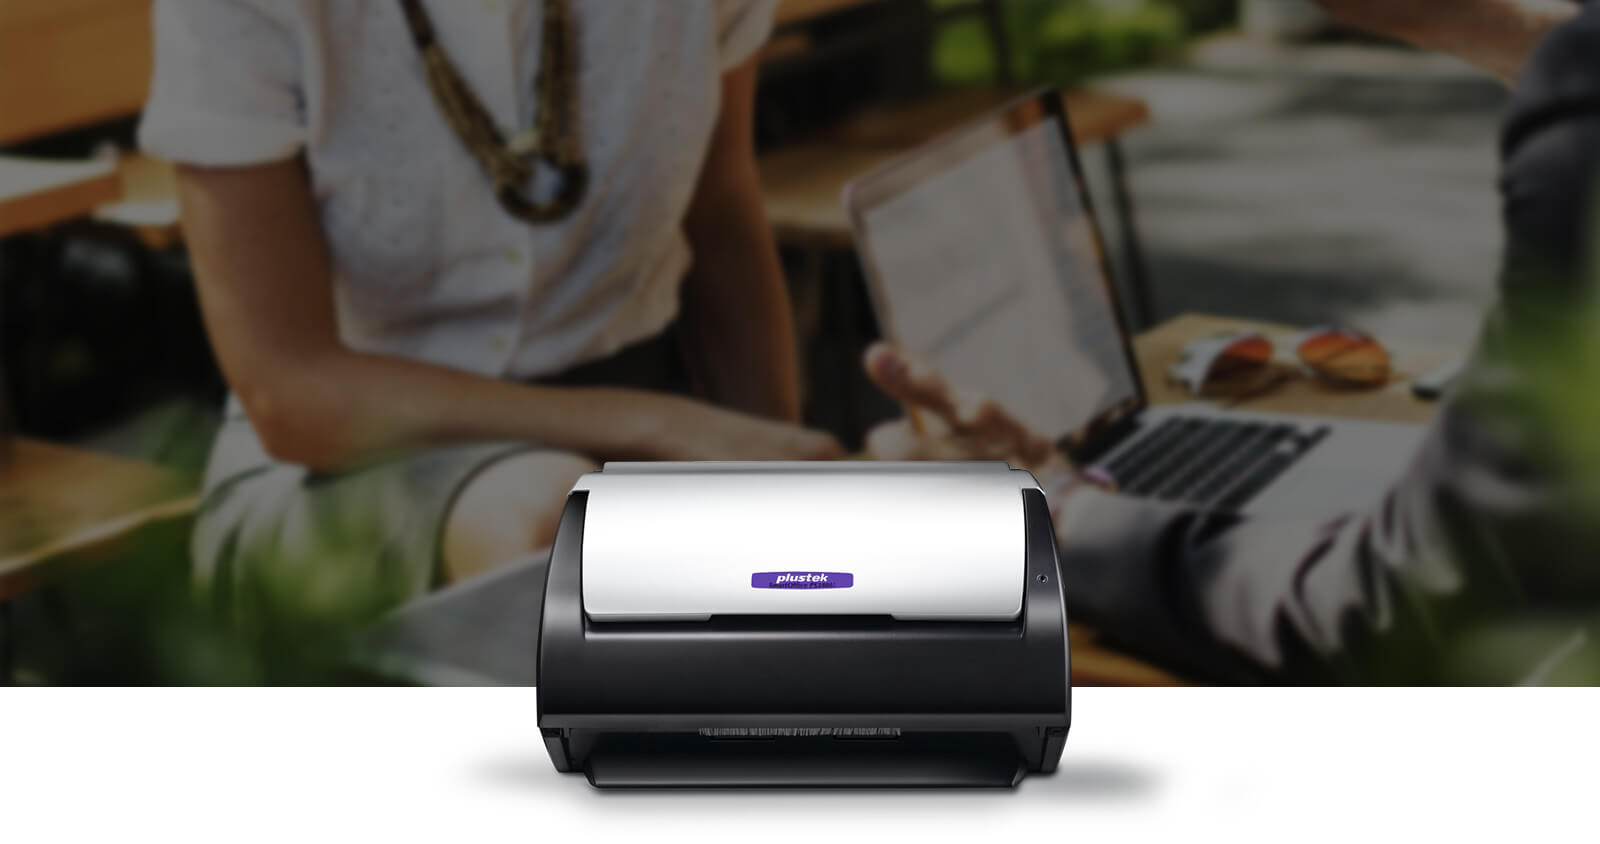 simple and compact design, you can move the scanner to anywhere without hestitate